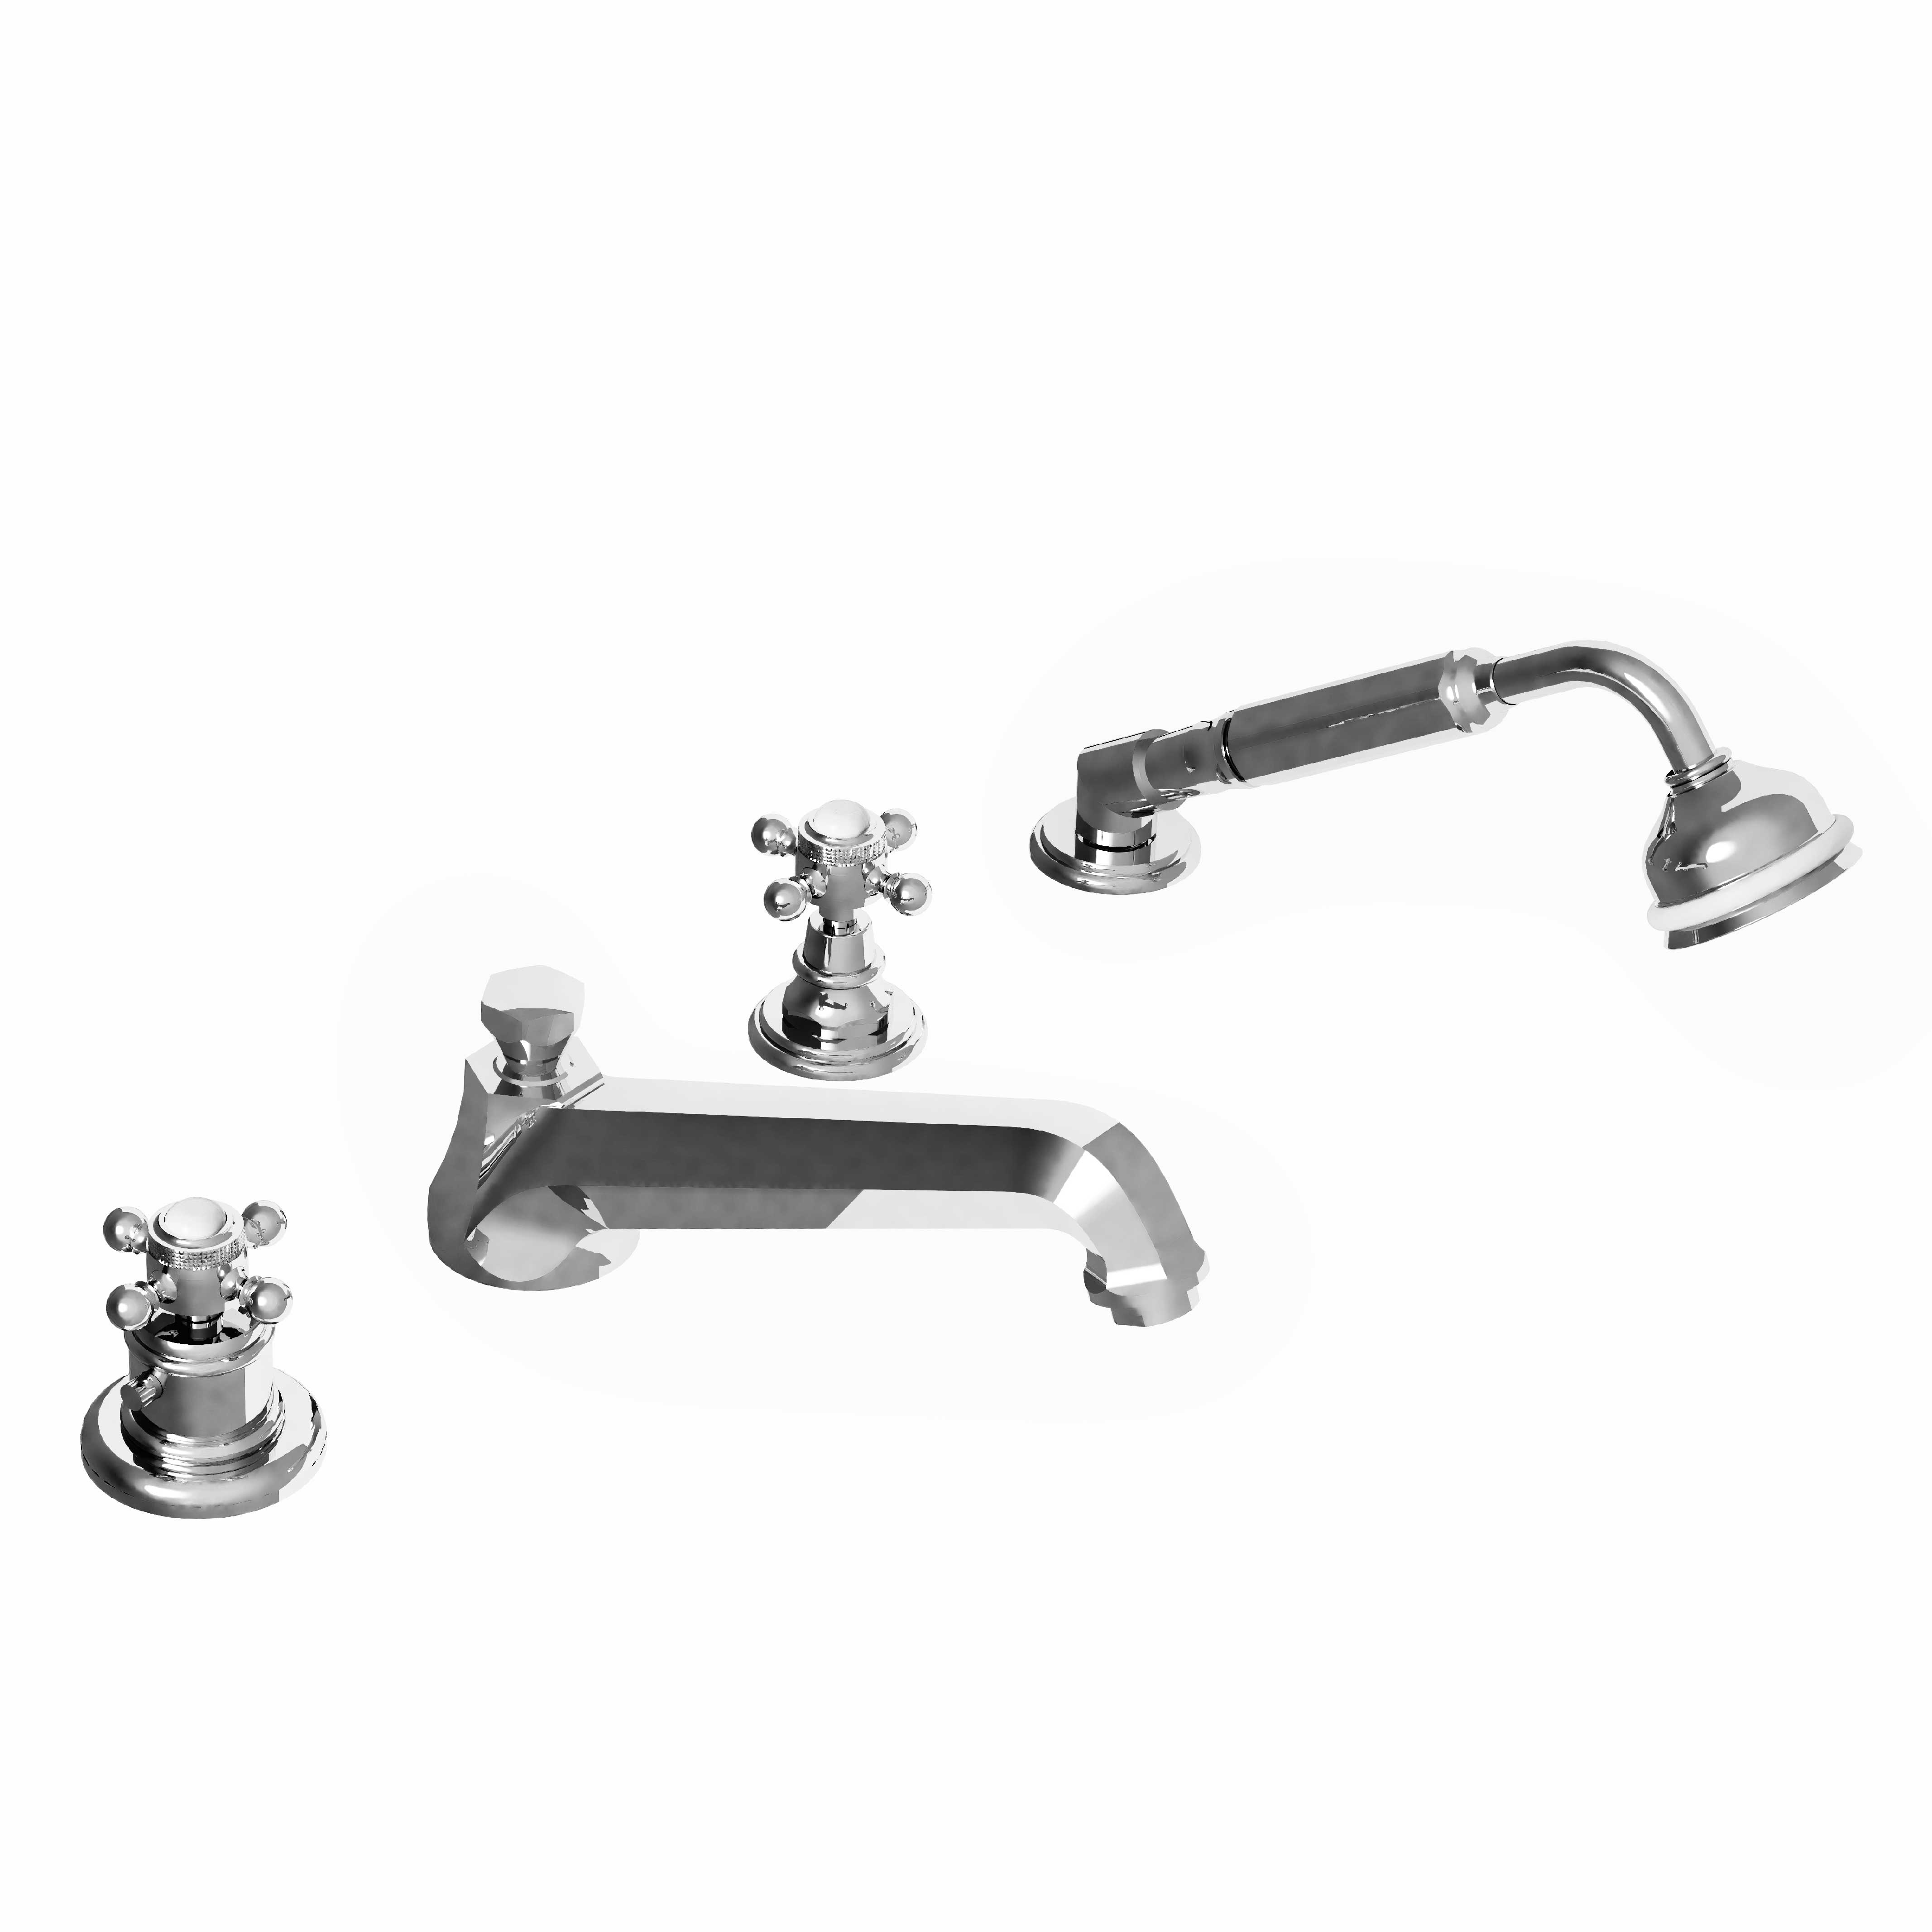 M30-3304T 4-hole bath and shower thermo. mixer